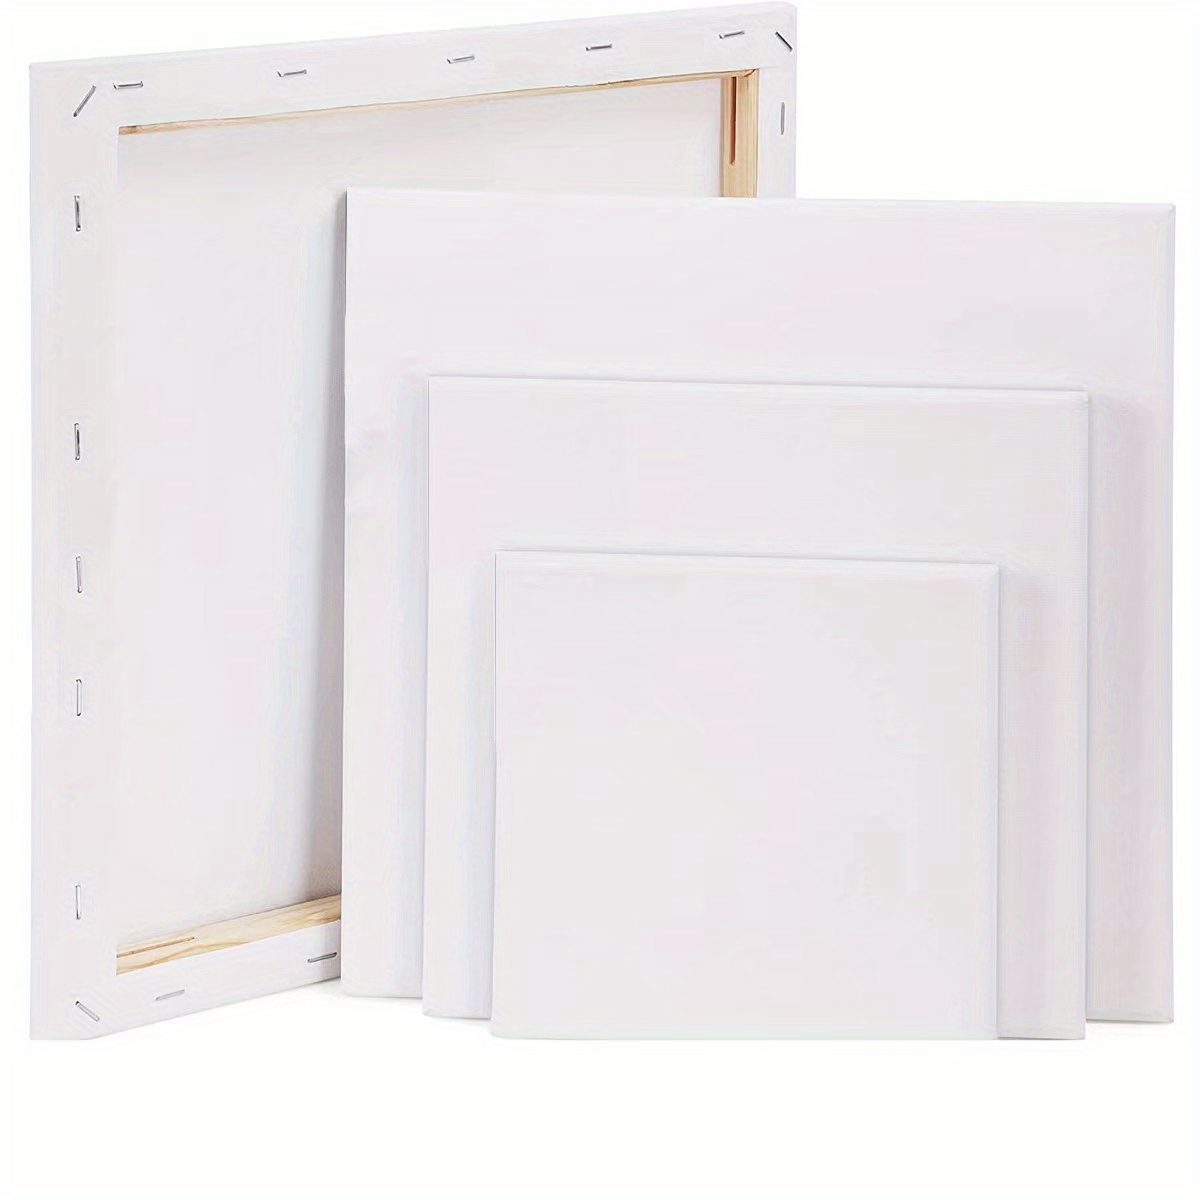  Stretched Canvas for Painting 10 oz Triple Primed